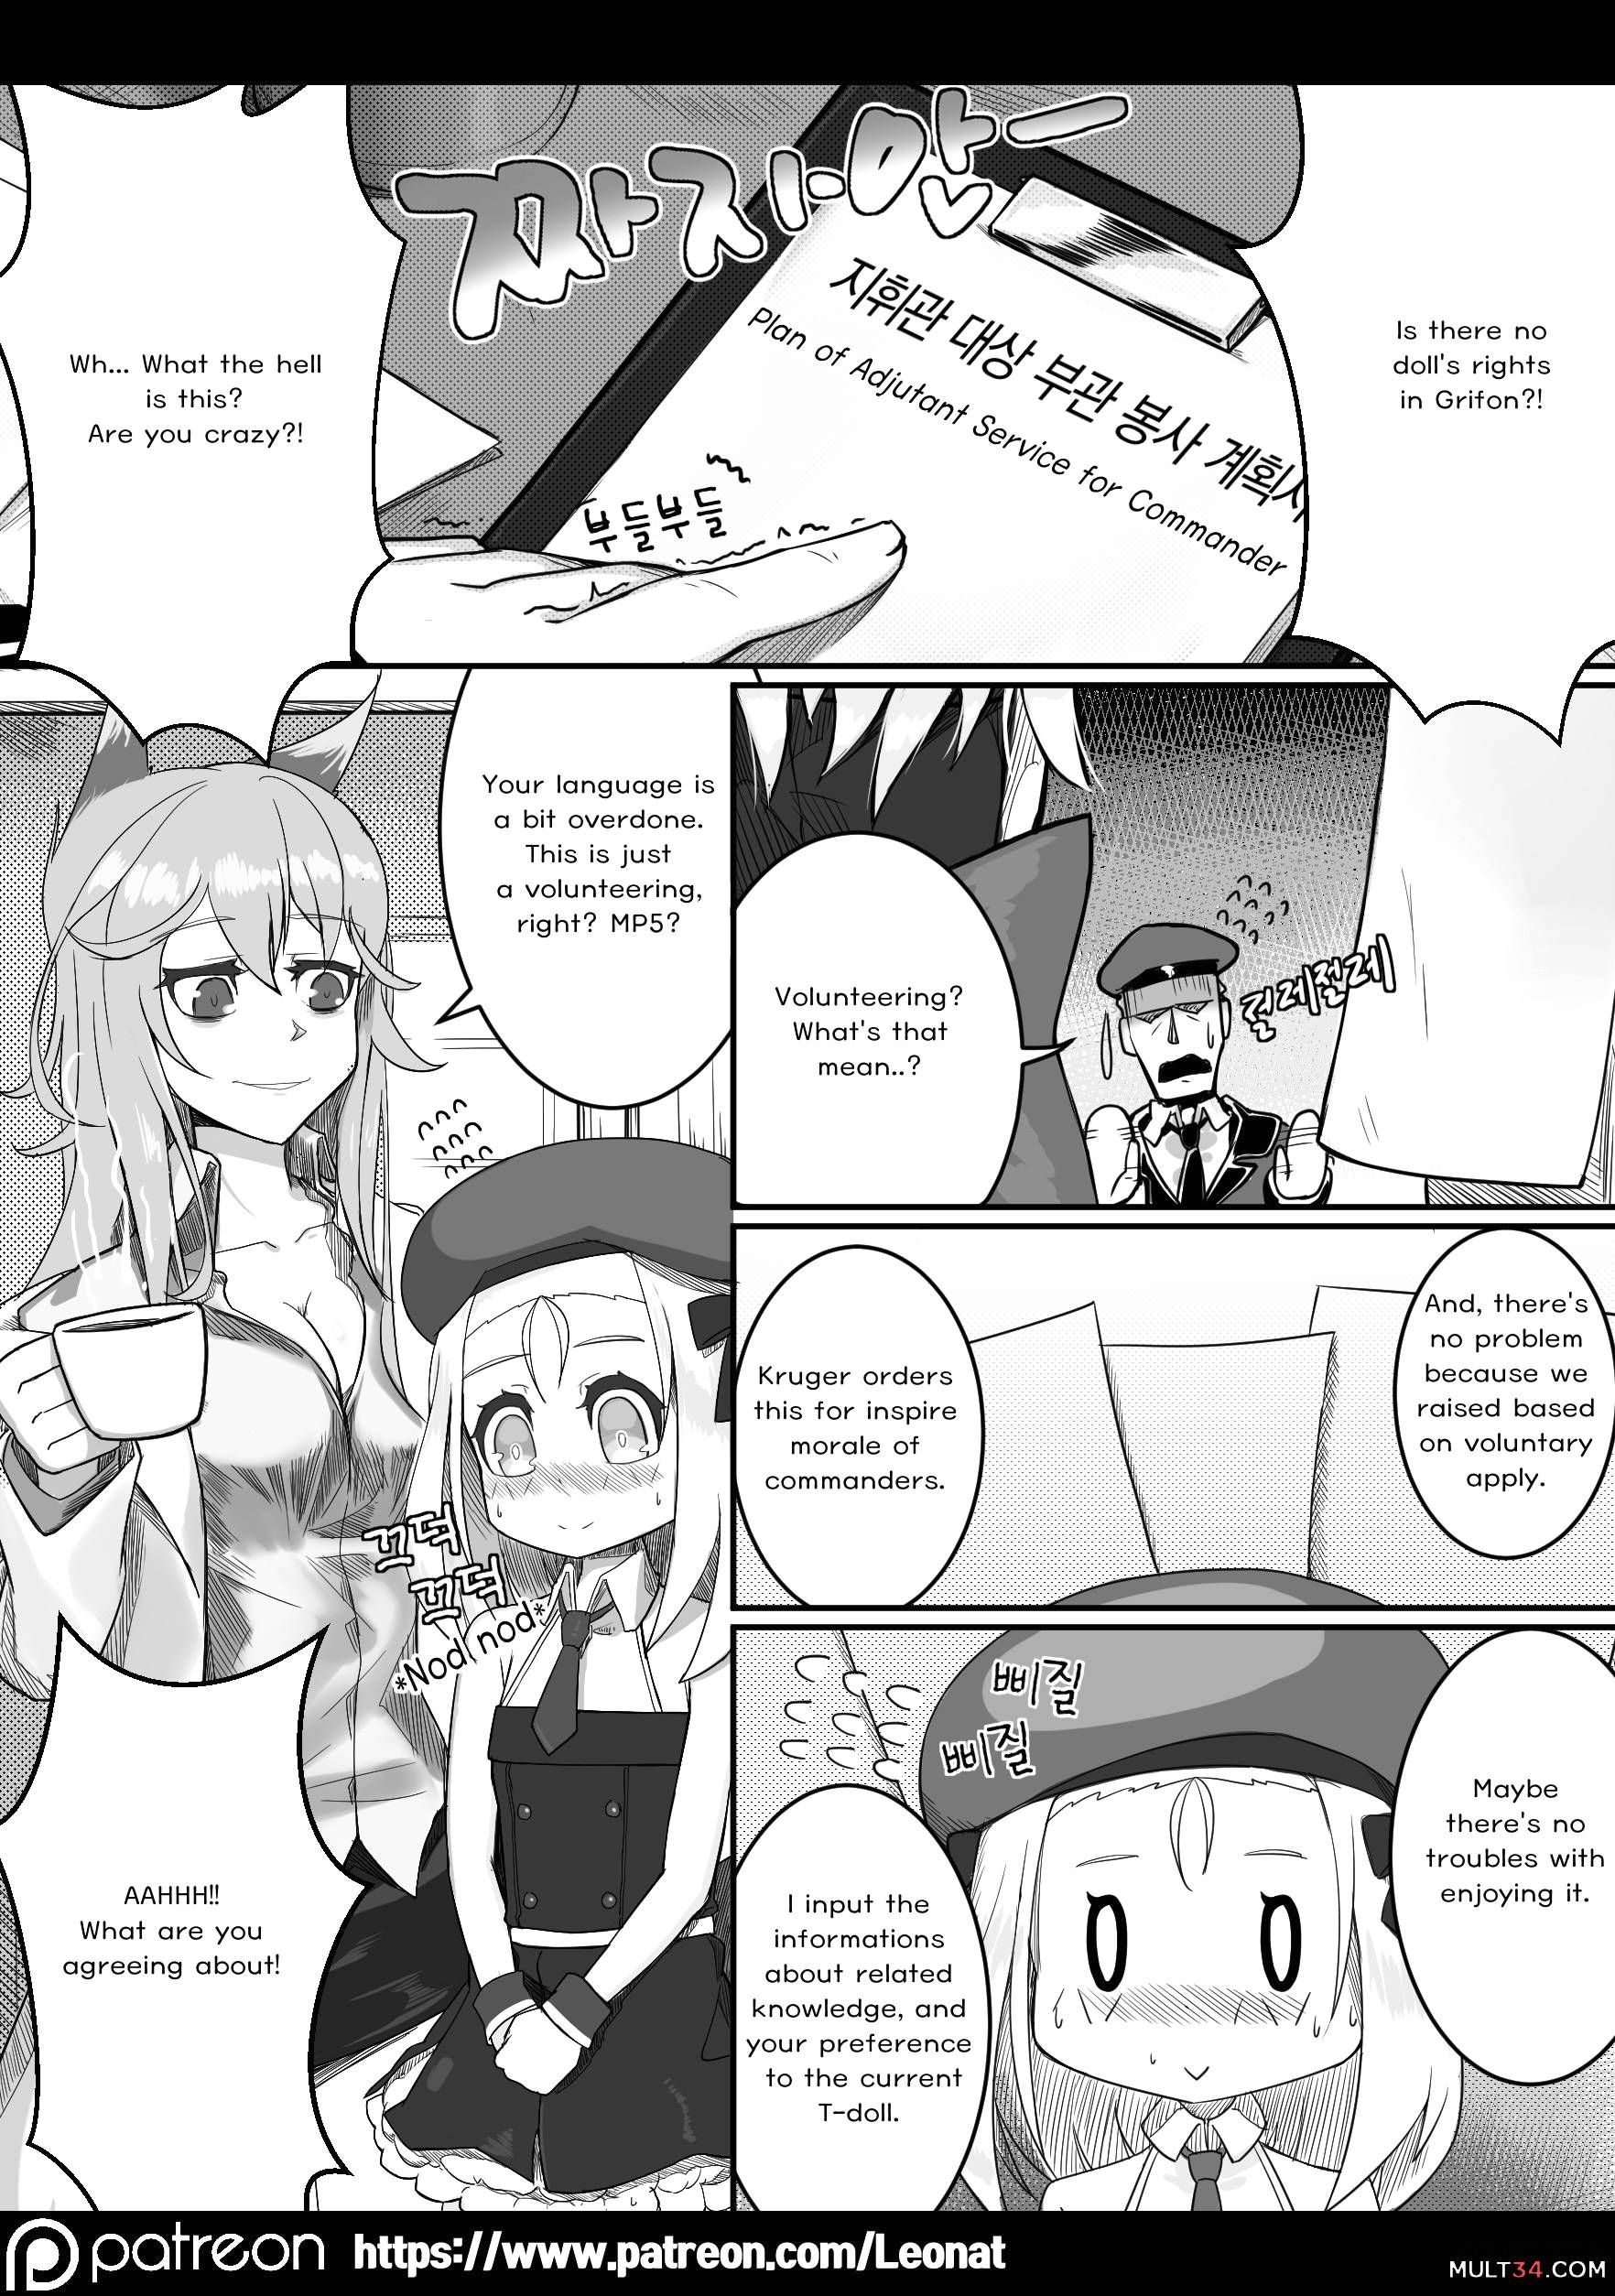 Lounge of HQ vol.2 page 5